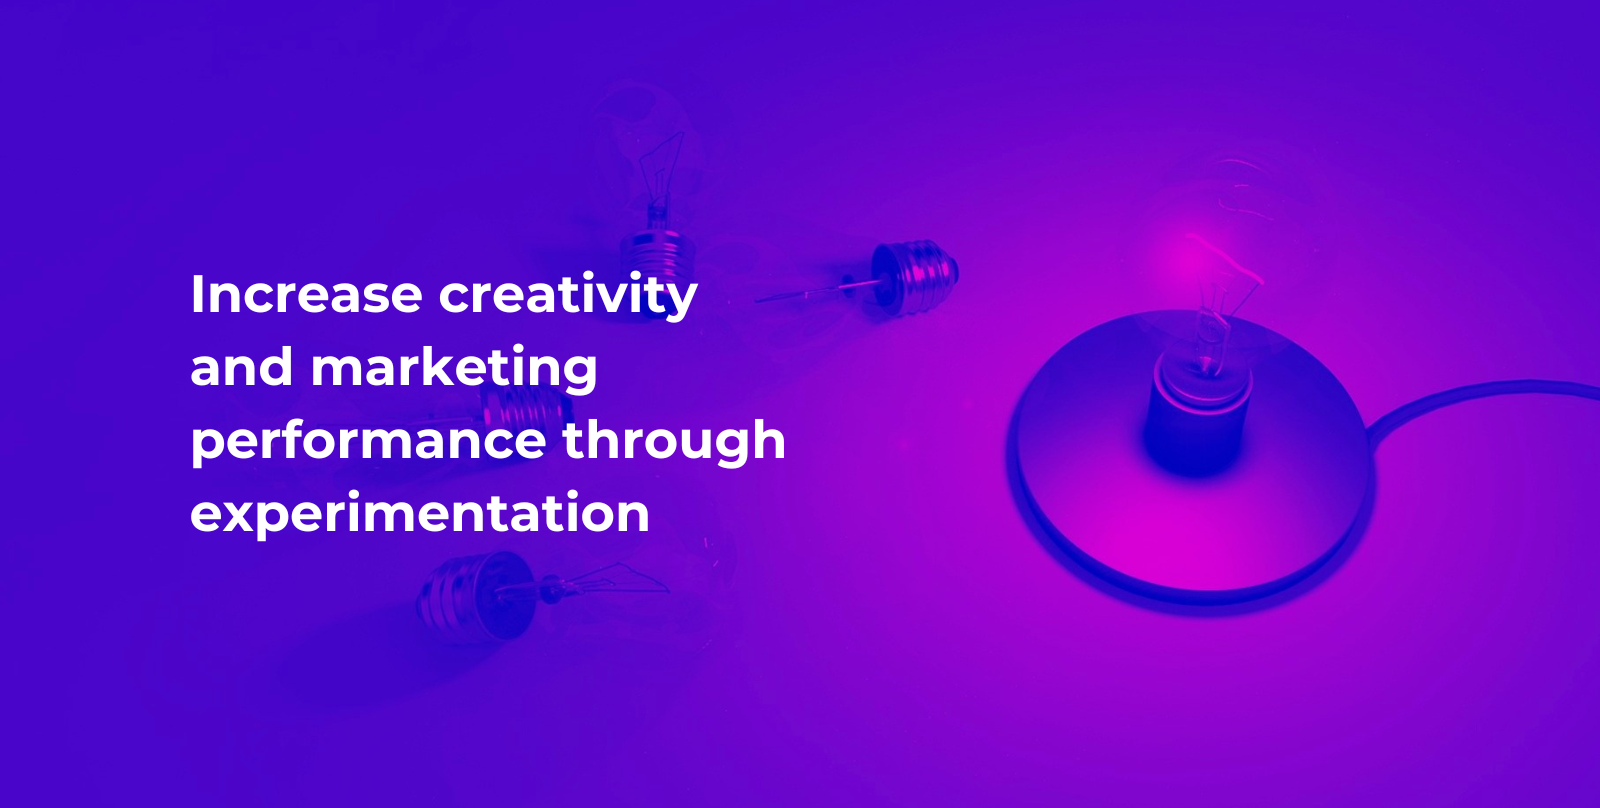 Why experimentation is crucial in marketing